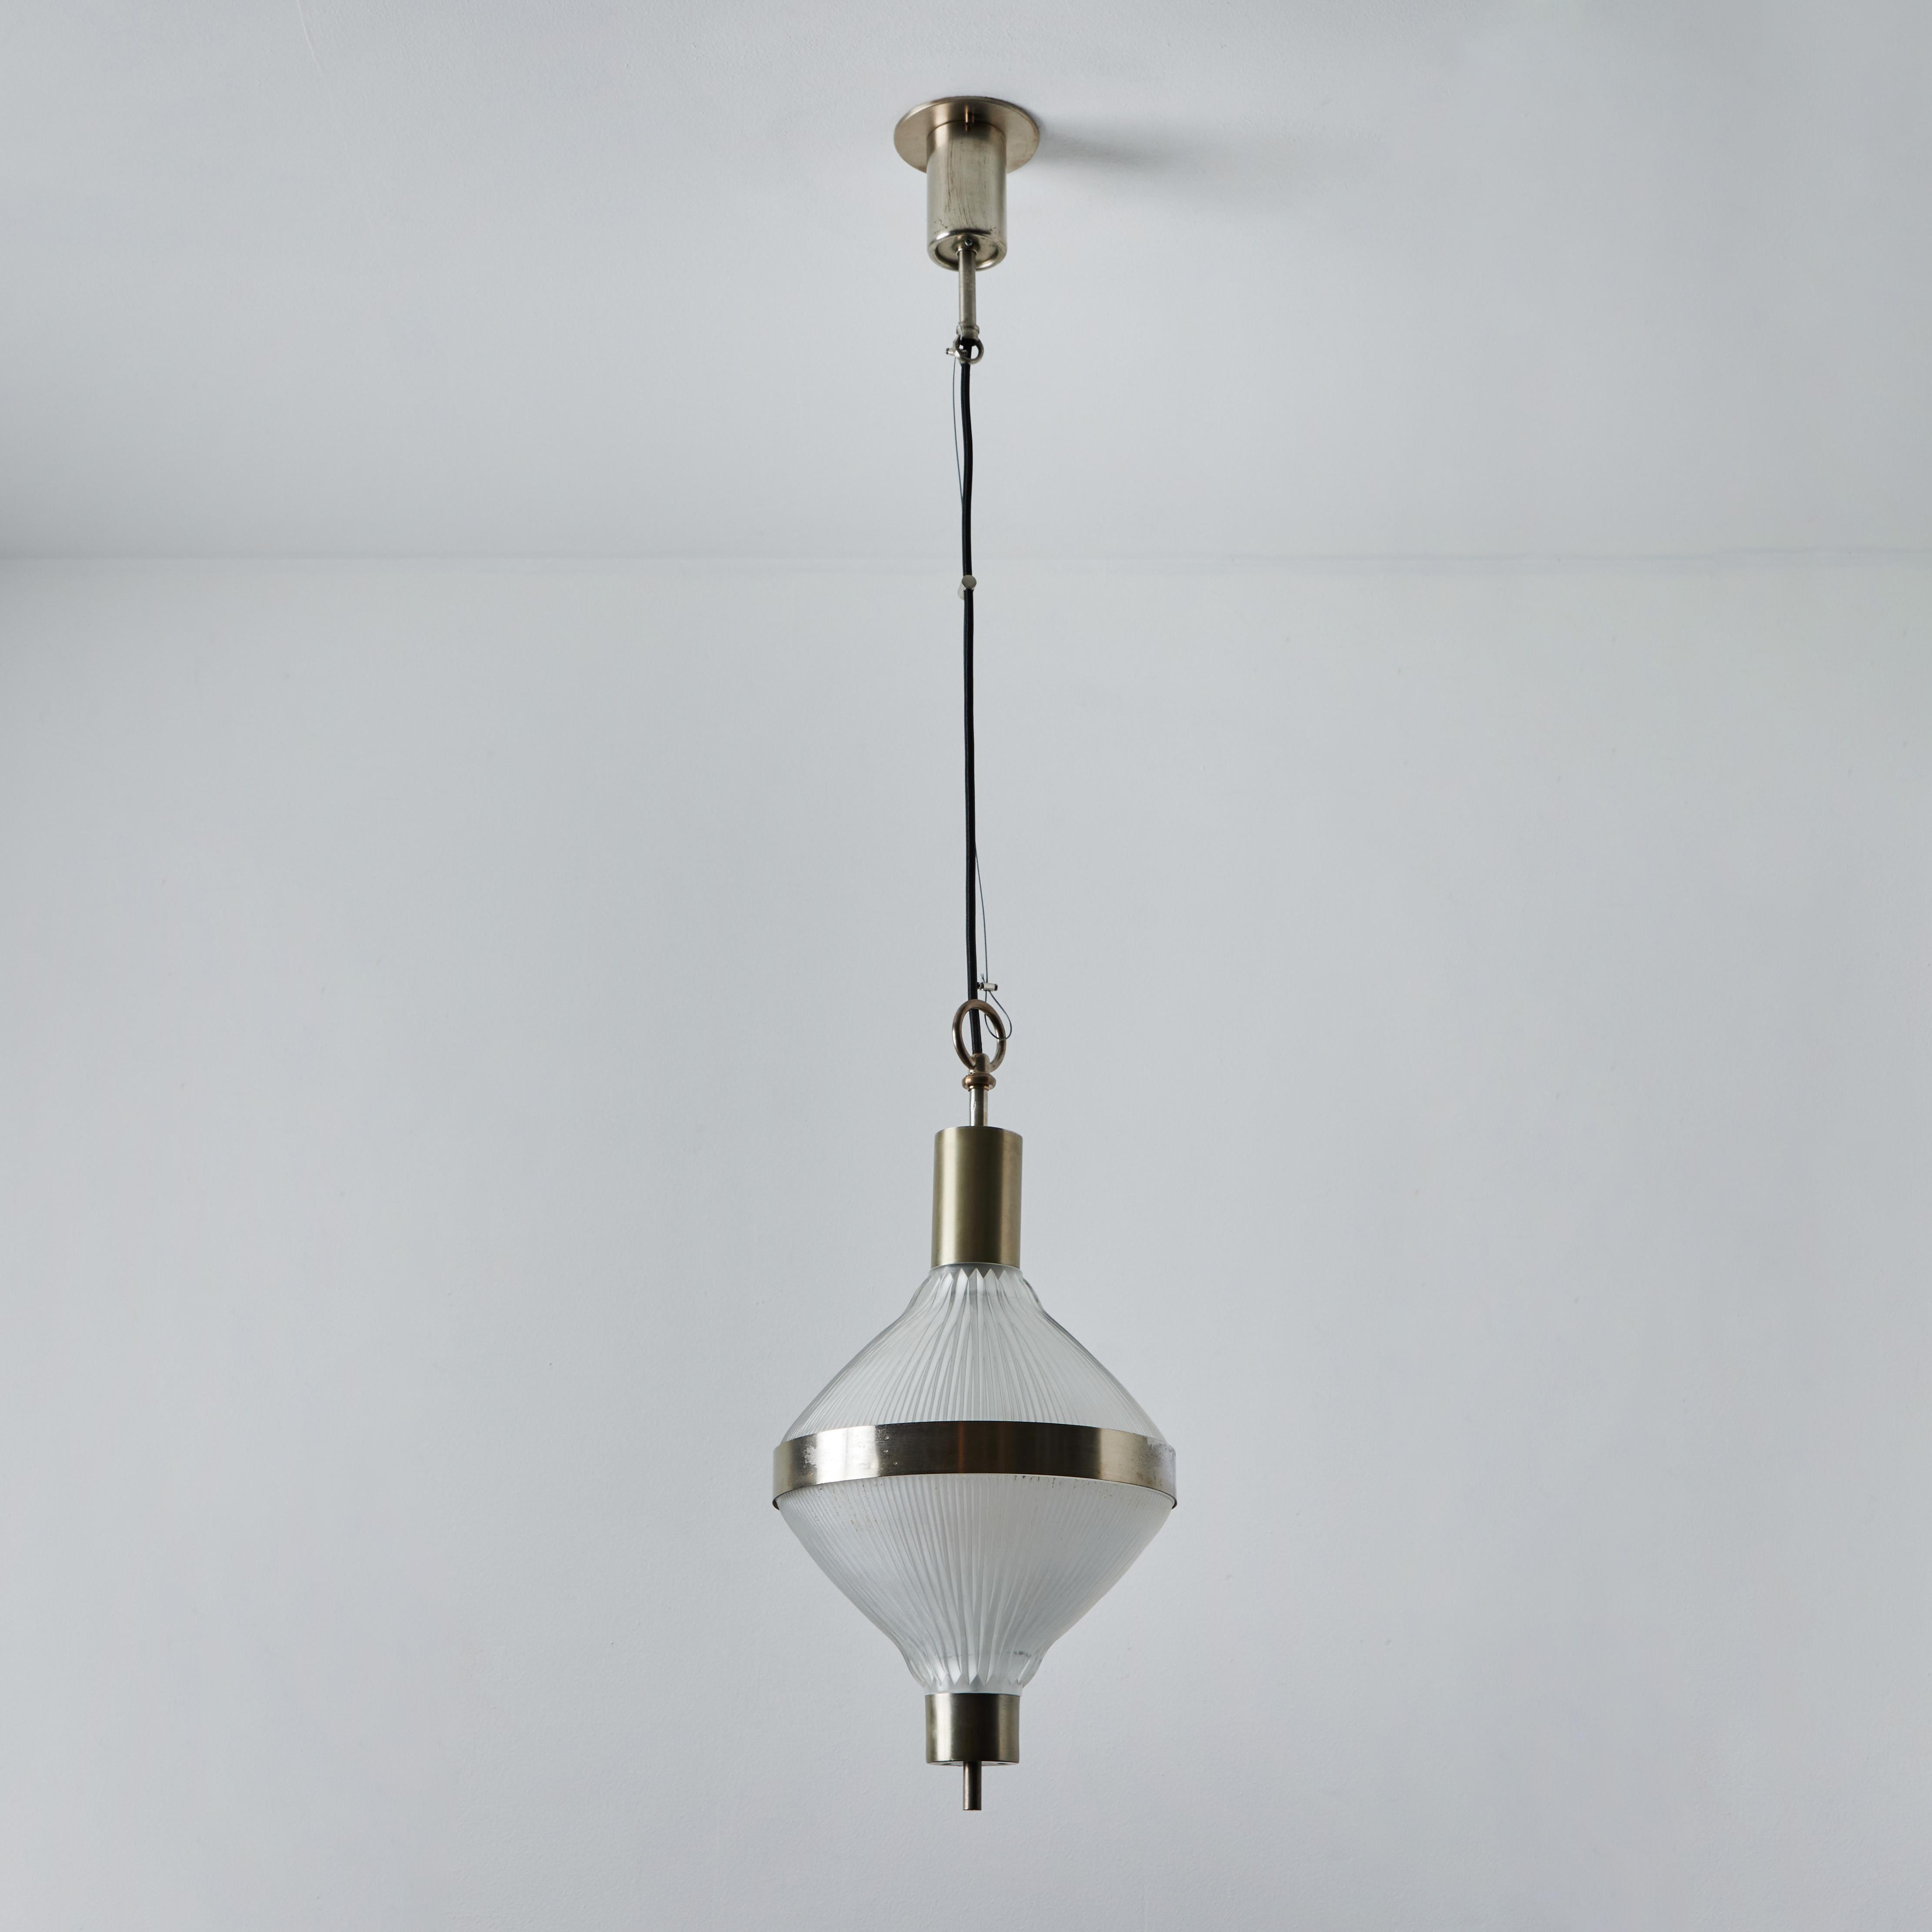 Pressed Large Studio B.B.P.R 'Polinnia' Glass and Metal Pendant c. 1964 for Artemide For Sale